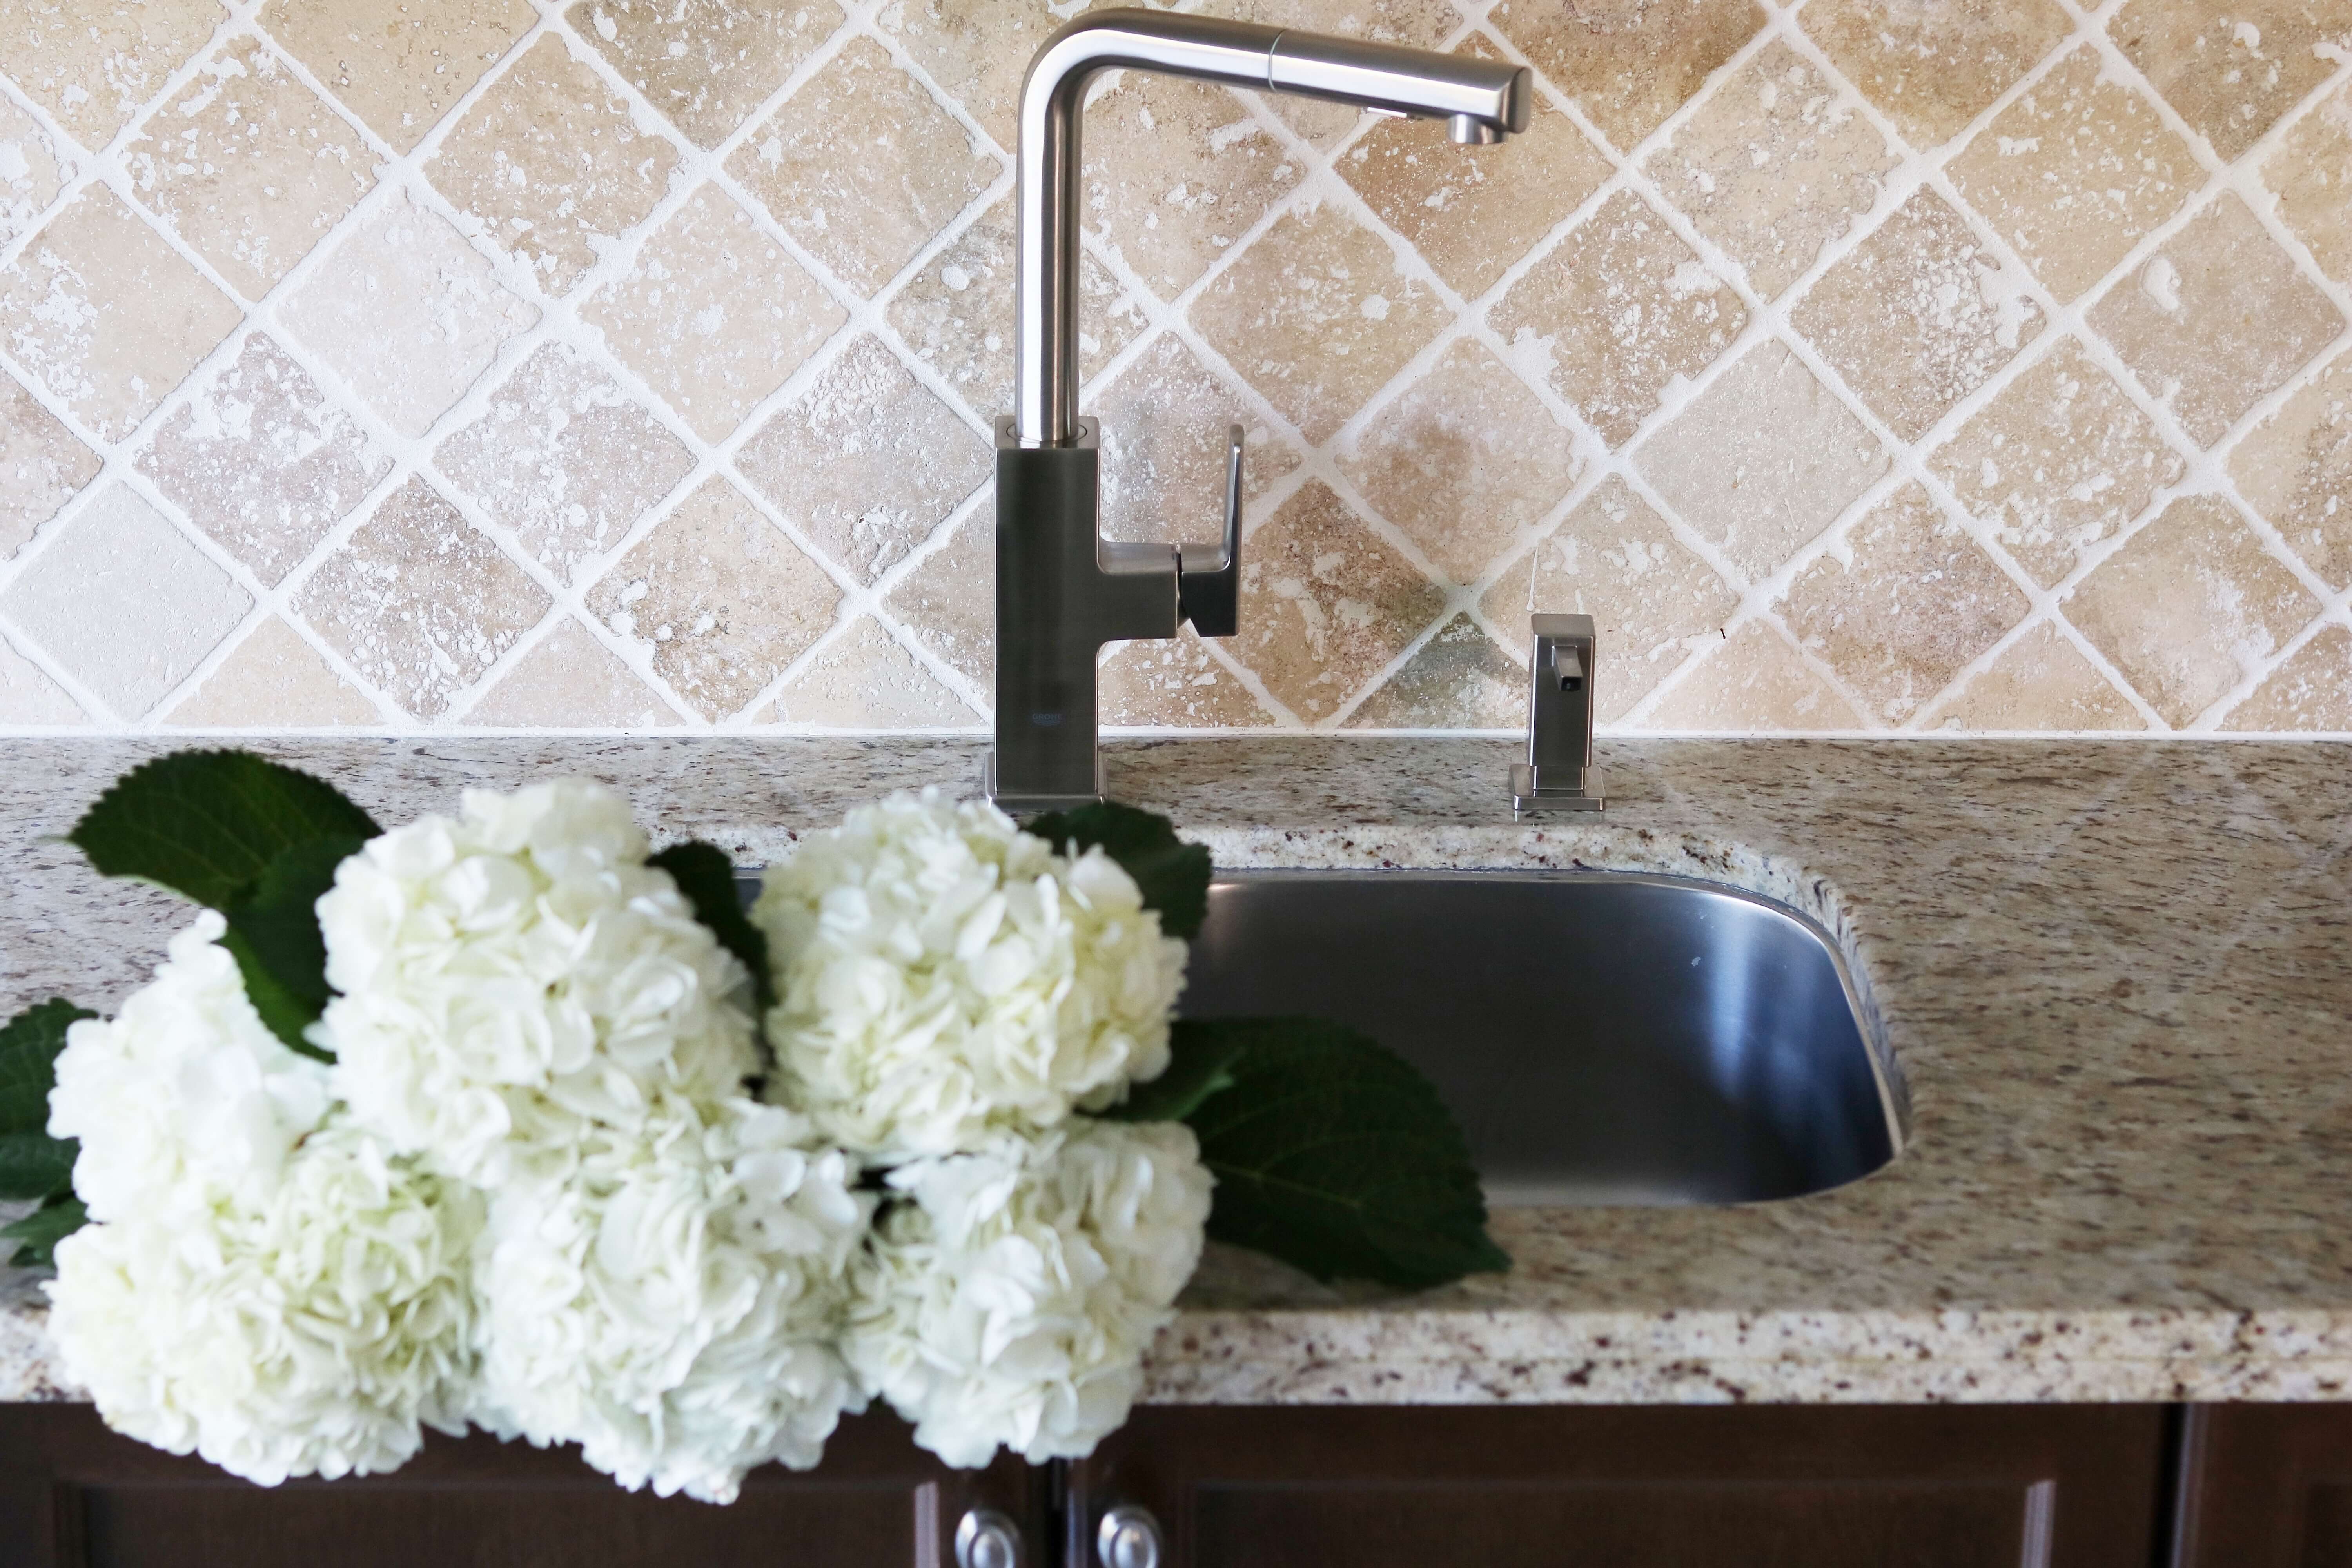 Home Depot Canada Kitchen update Grohe “Tallinn” Kitchen Pull-Out Faucet sparkleshinylove